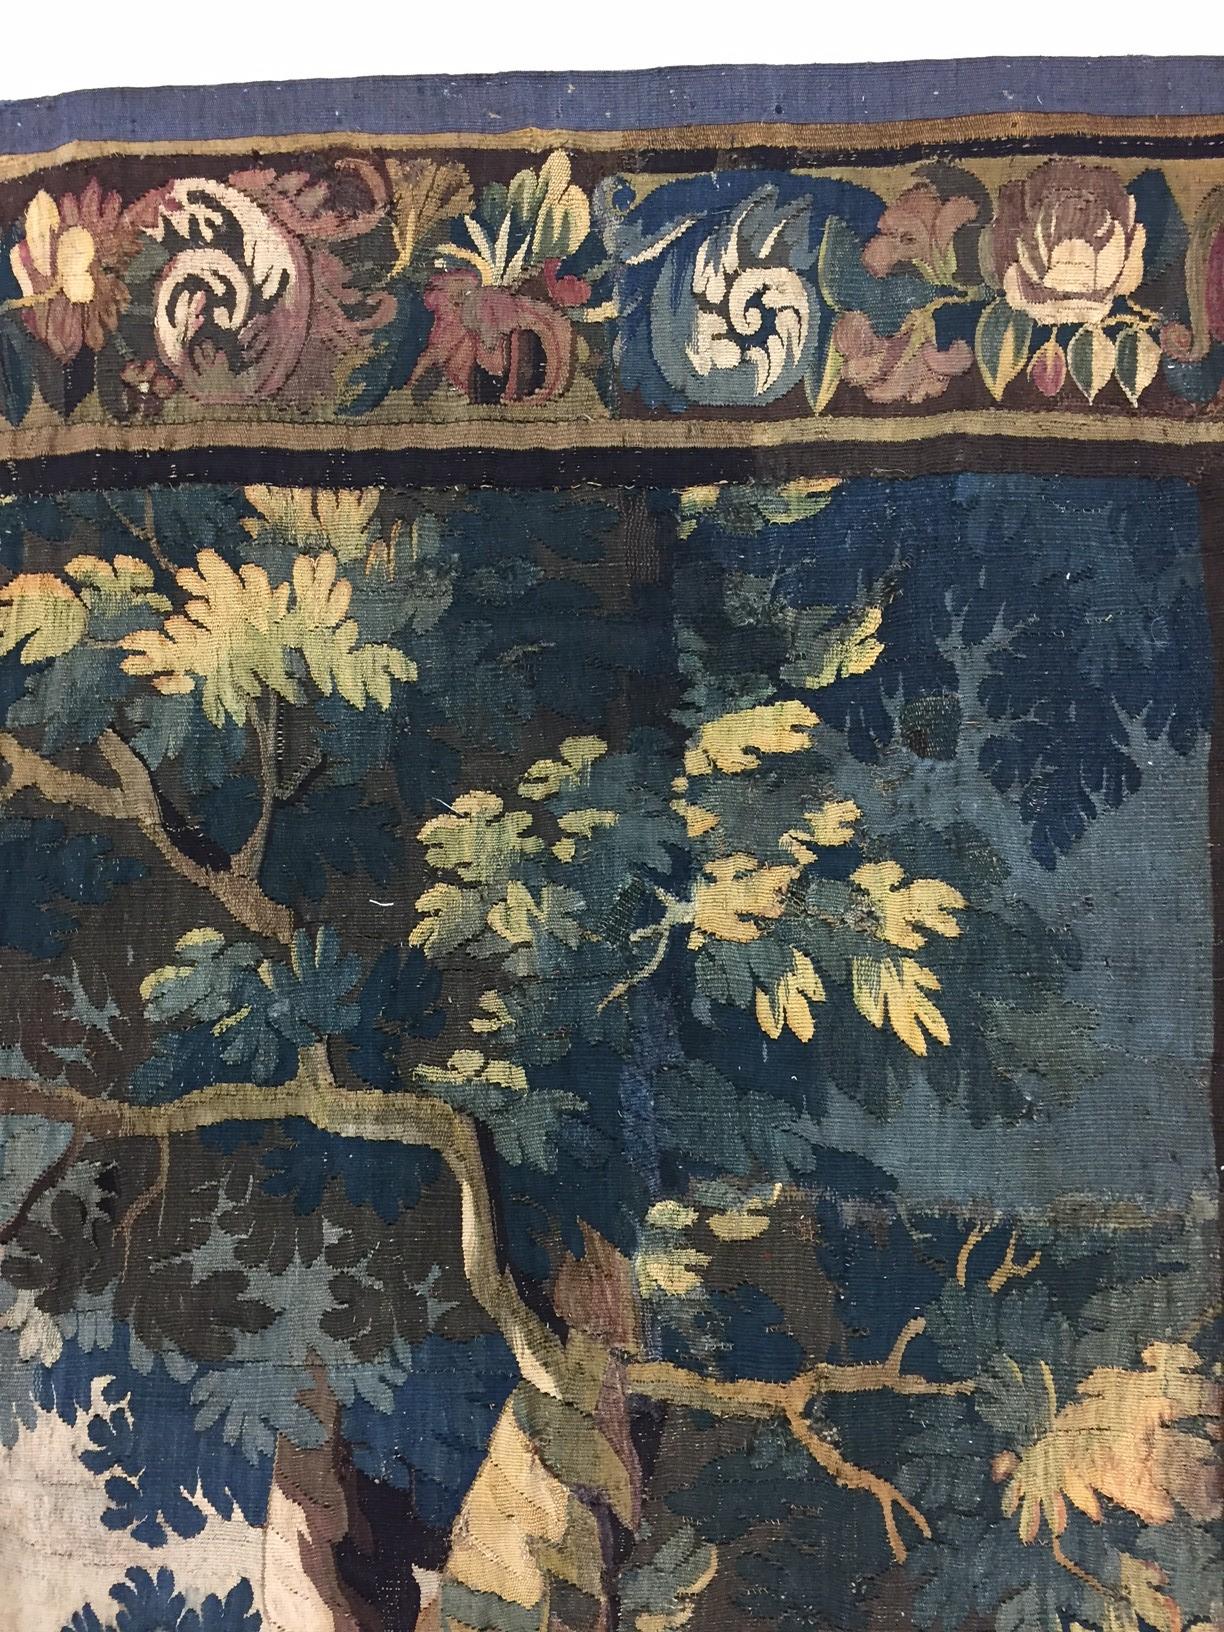 Hand-Knotted Antique 18th Century Flemish Verdure Landscape Tapestry with Lush Forest Setting